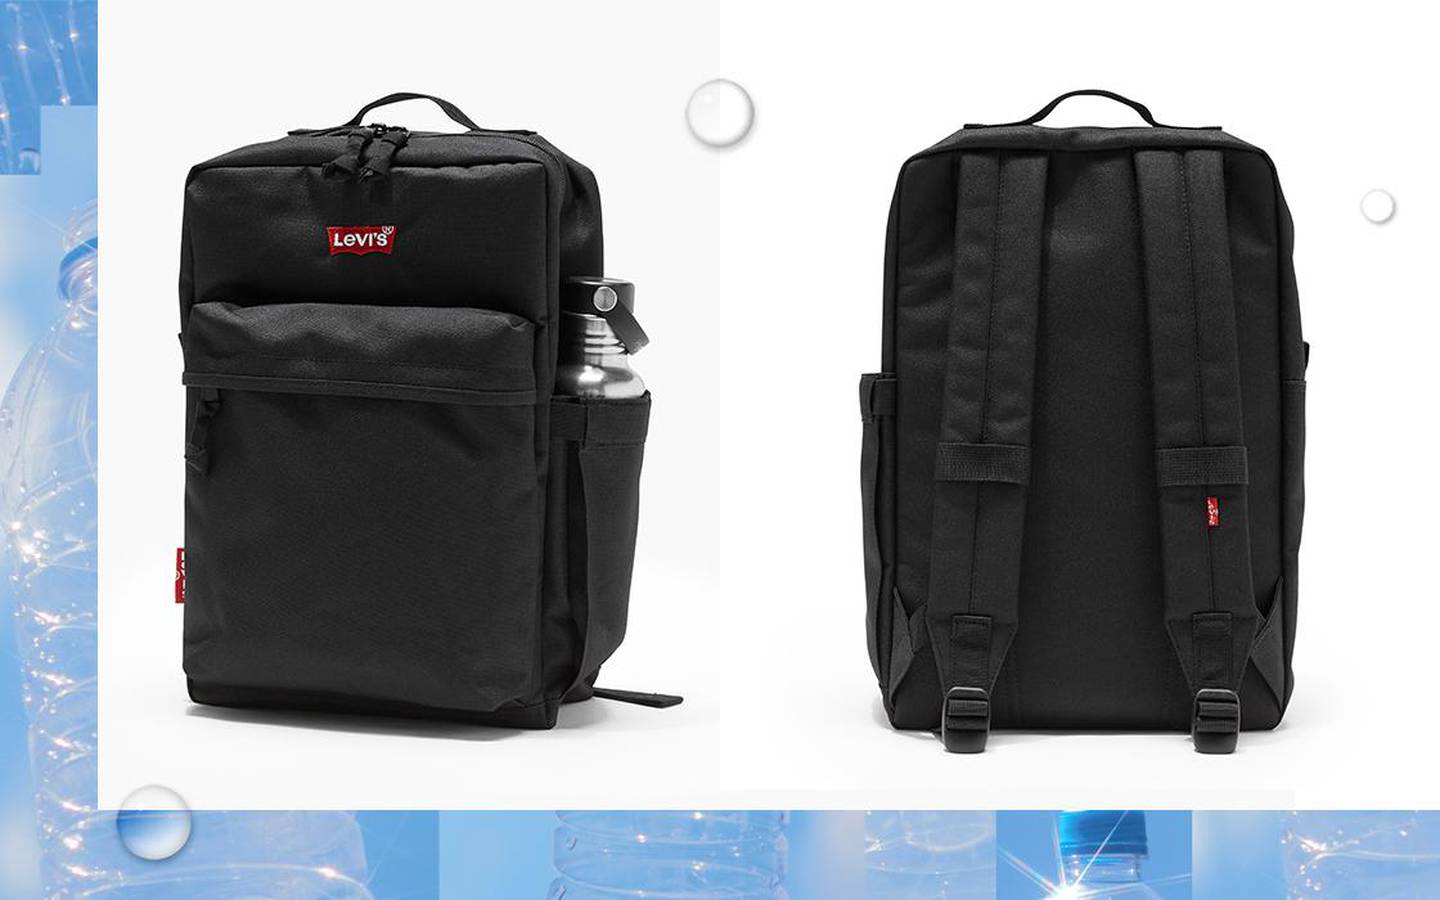 The new generation Levi's backpack is made purely from recycled plastic water bottles. Courtesy Levi's